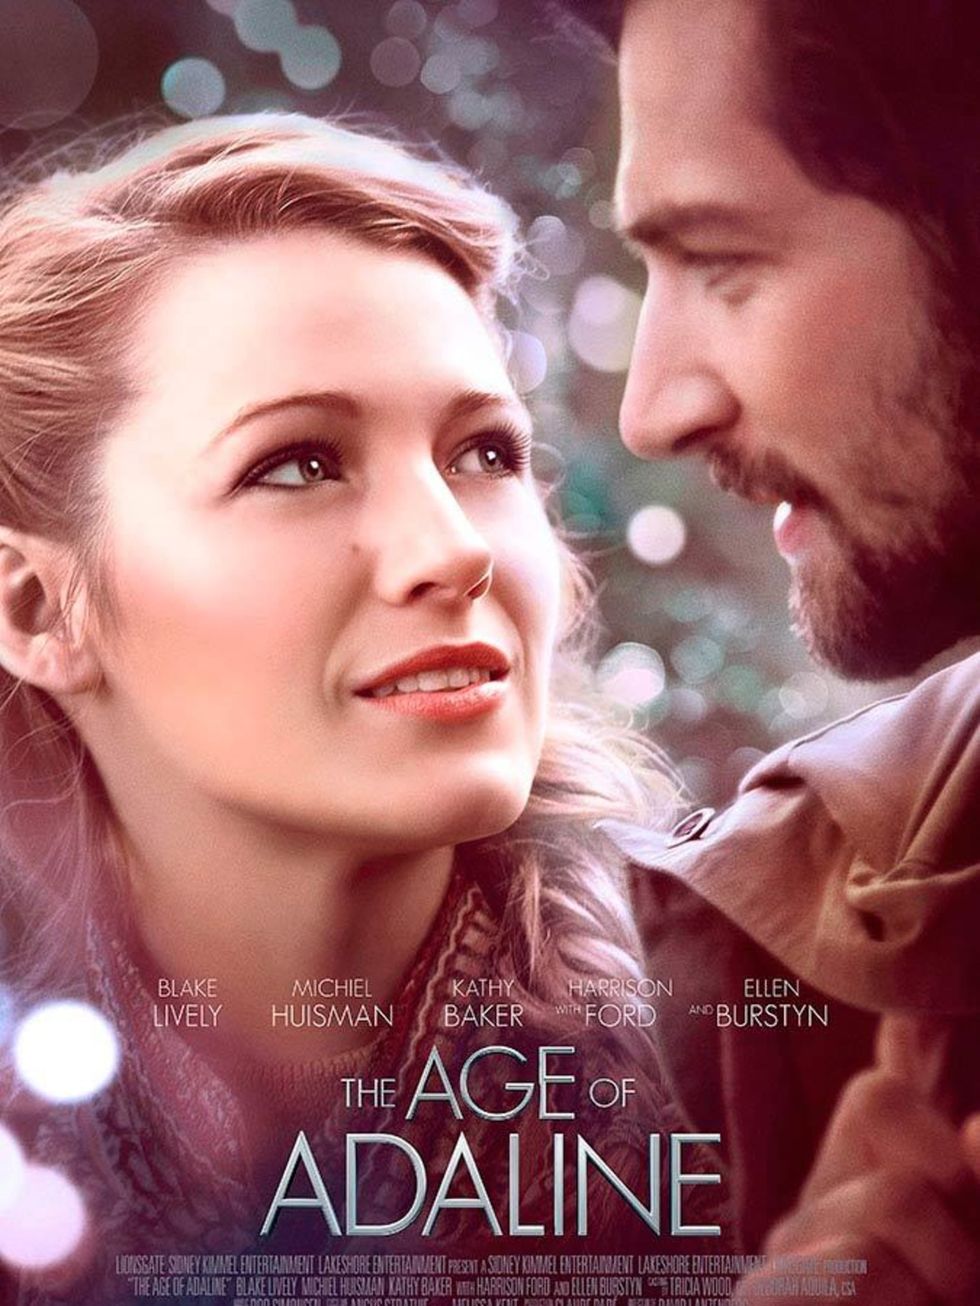 <p><strong>FILM: The Age of Adaline</strong></p>

<p>Blake Lively has been a busy woman of late, what with having beautiful babies with Ryan Reynolds and becoming the internets foremost ludicrous-celebrity- lifestyle blogger (sorry Gwynneth). So heres a